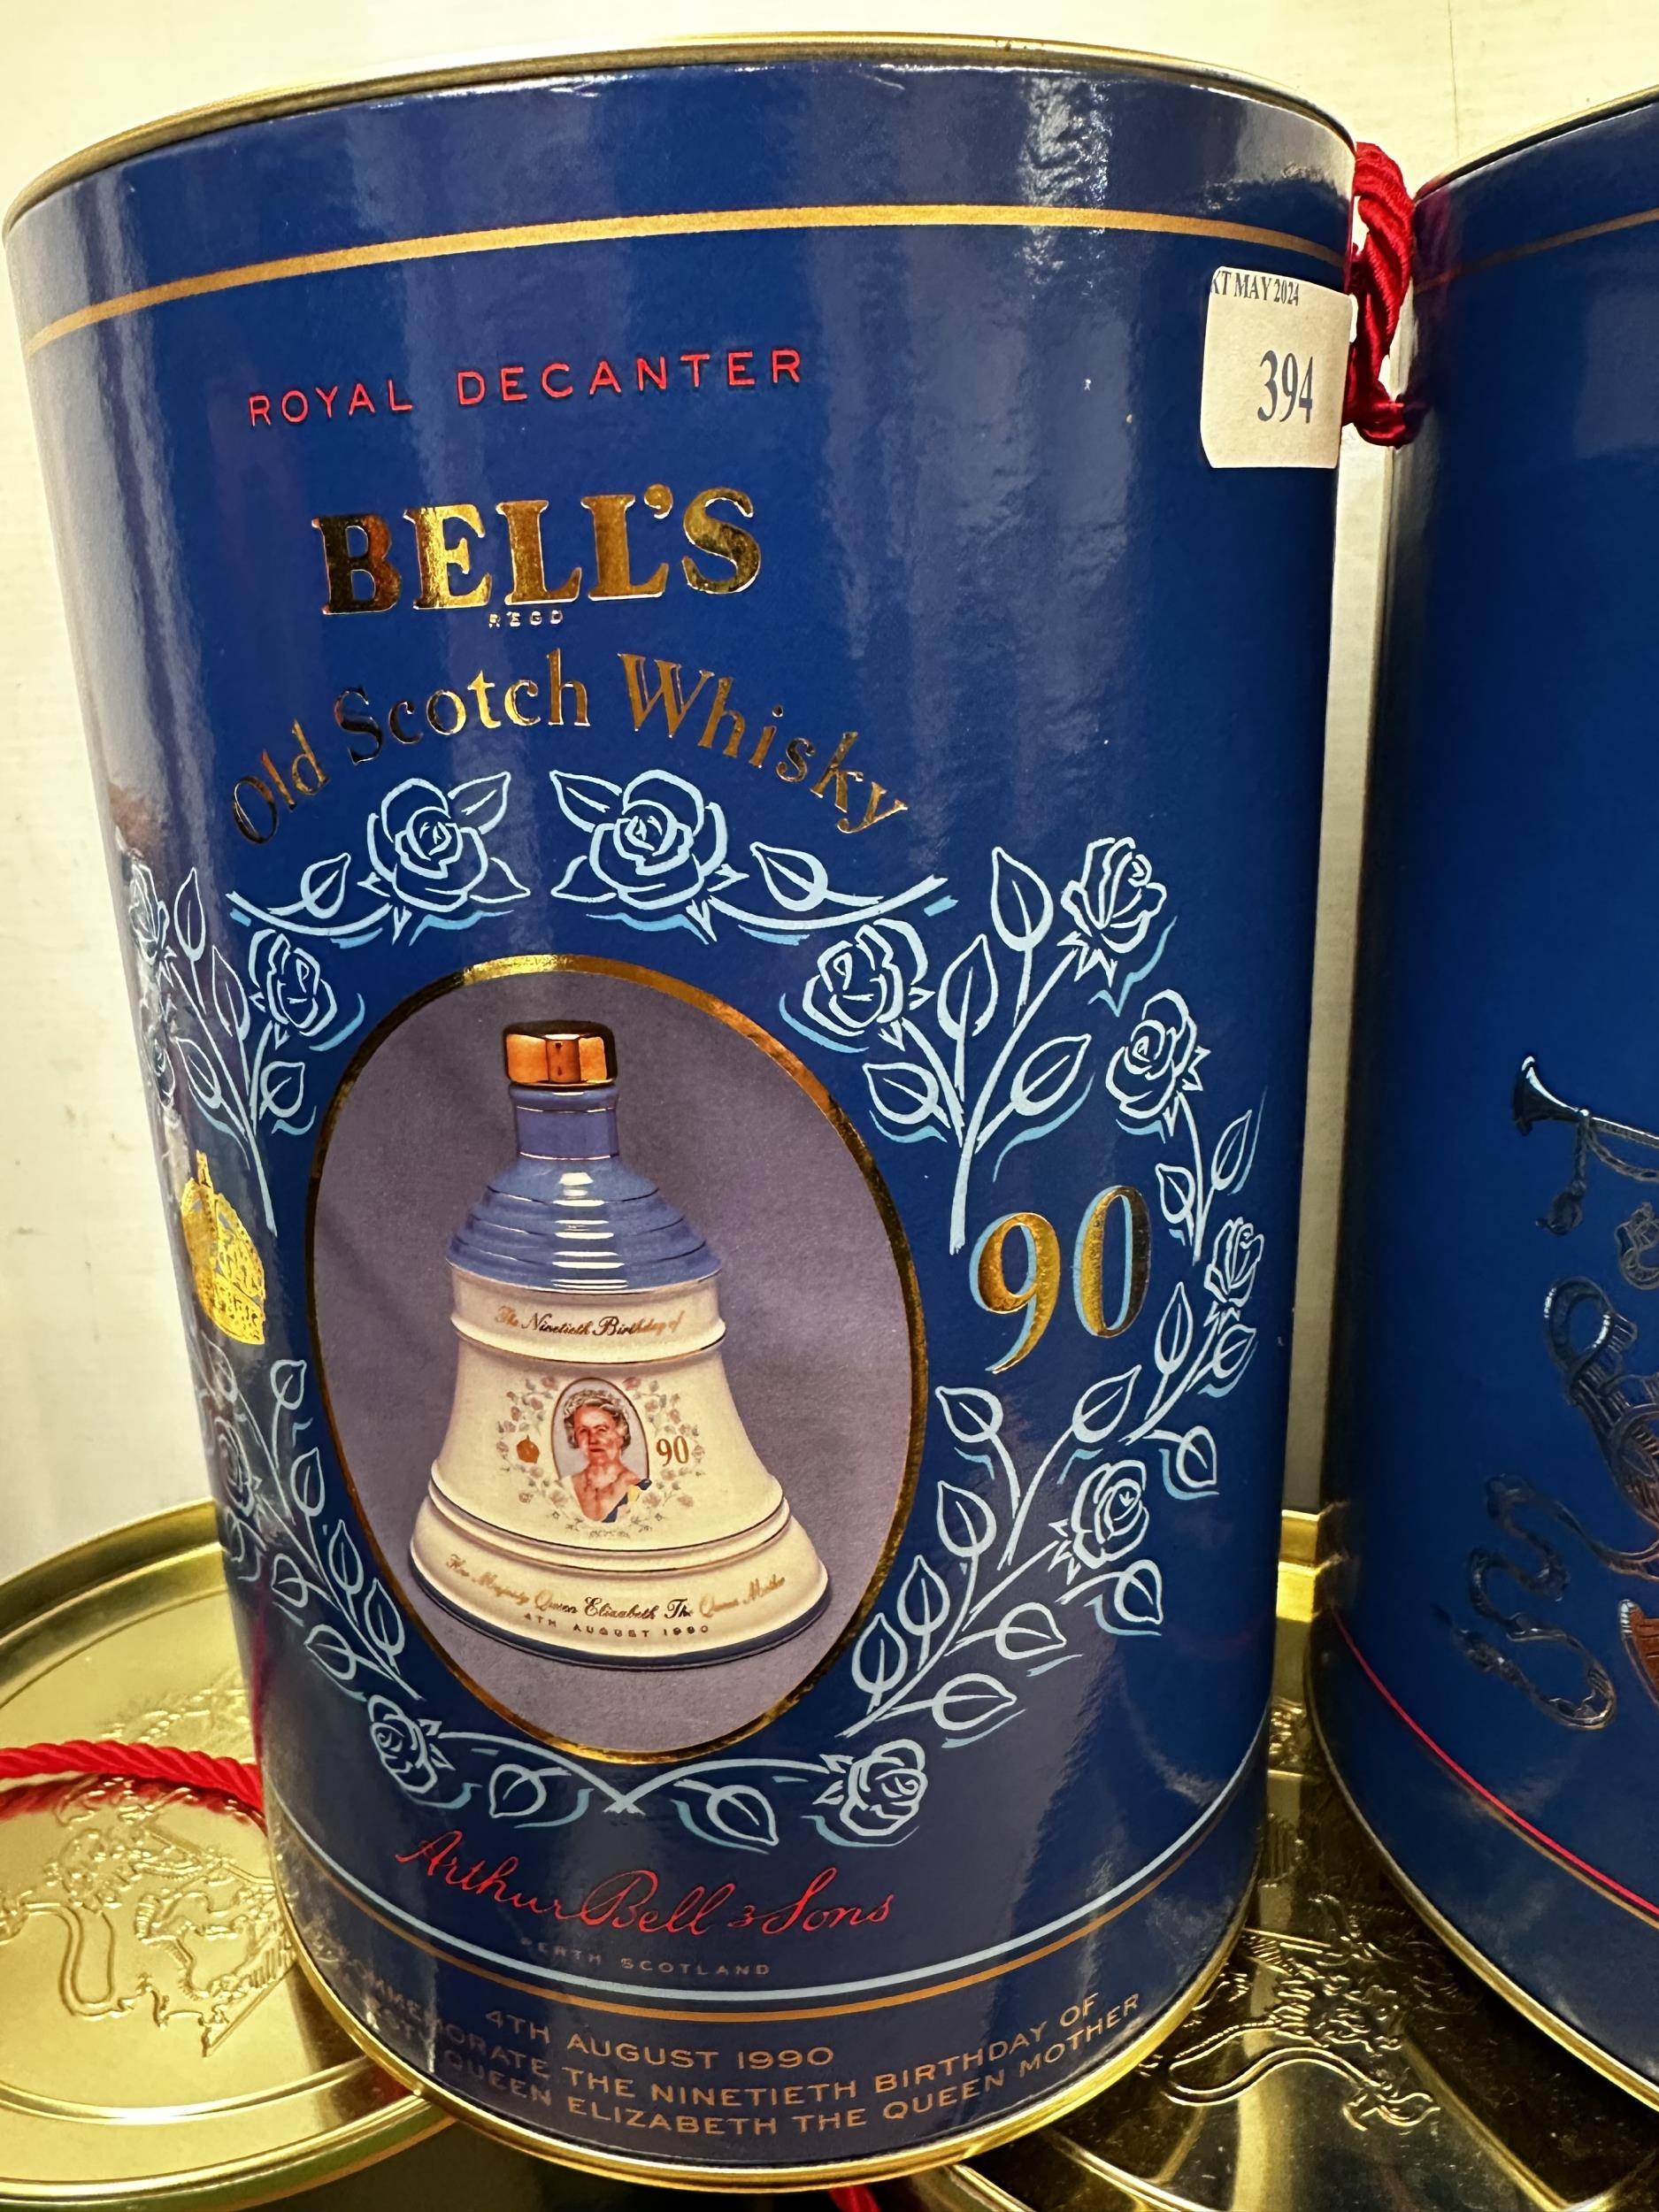 Seven bottle of Bells Royal Decanter Old Scotch Whiskey. All in presentation tins. - Image 6 of 6